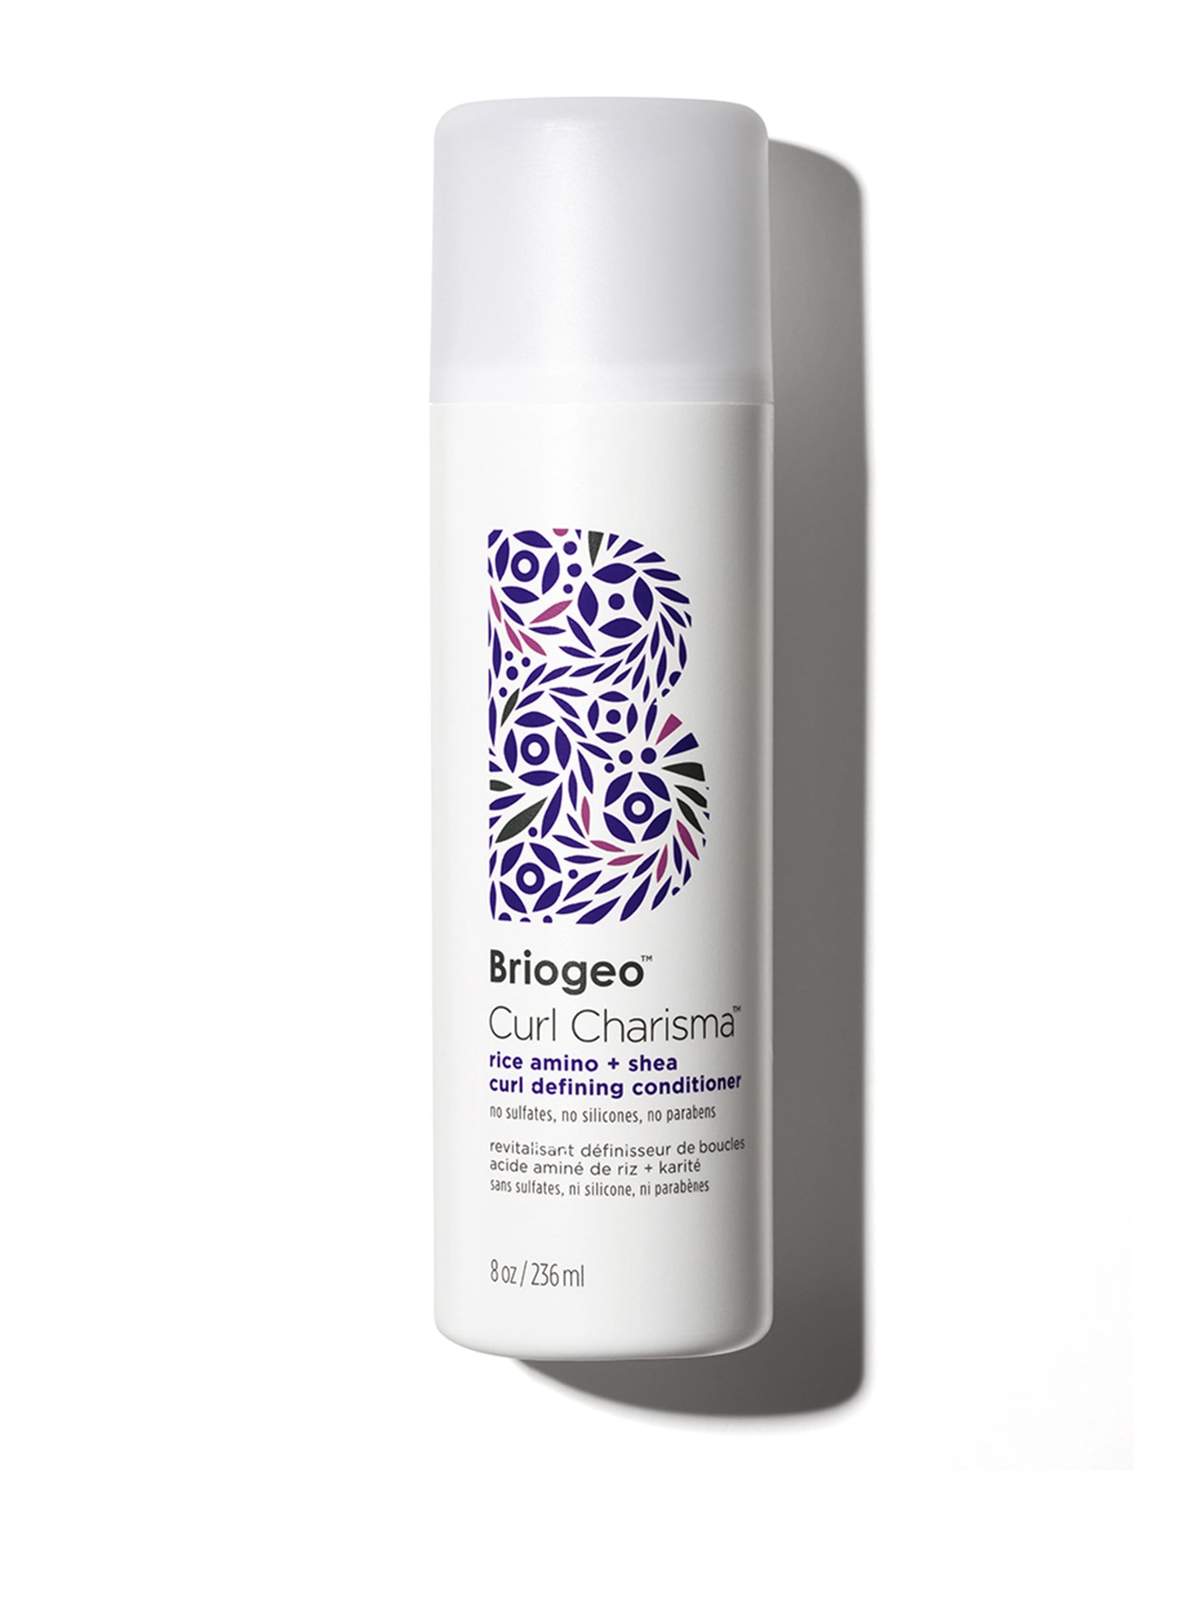 A bottle of briogio curl charisma conditioner for curly hair